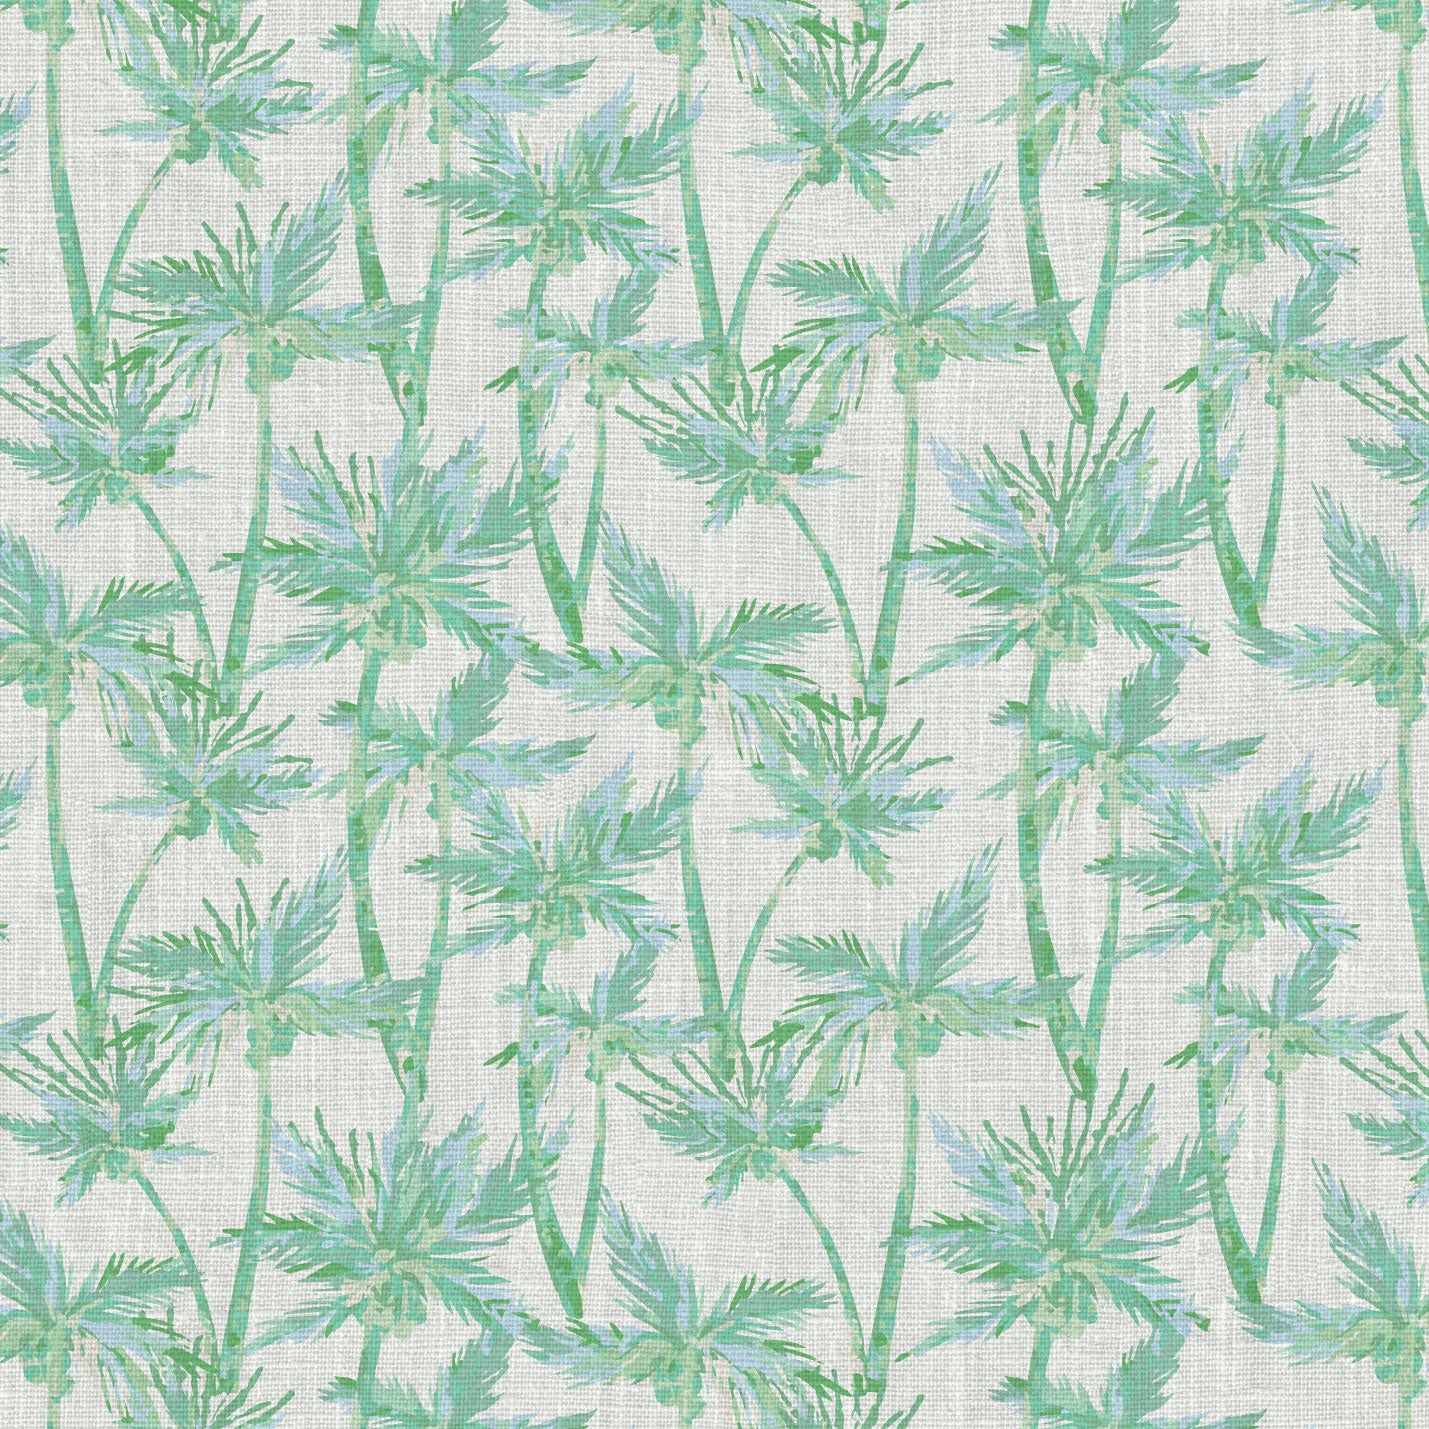 wallpaper Natural Textured Eco-Friendly Non-toxic High-quality Sustainable Interior Design Bold Custom Tailor-made Retro chic Tropical Jungle Coastal Garden Seaside Coastal Seashore Waterfront Vacation home styling Retreat Relaxed beach vibes Beach cottage Shoreline Oceanfront nature palm tree palms tonal cream off-white beige green jungle mint sage linen